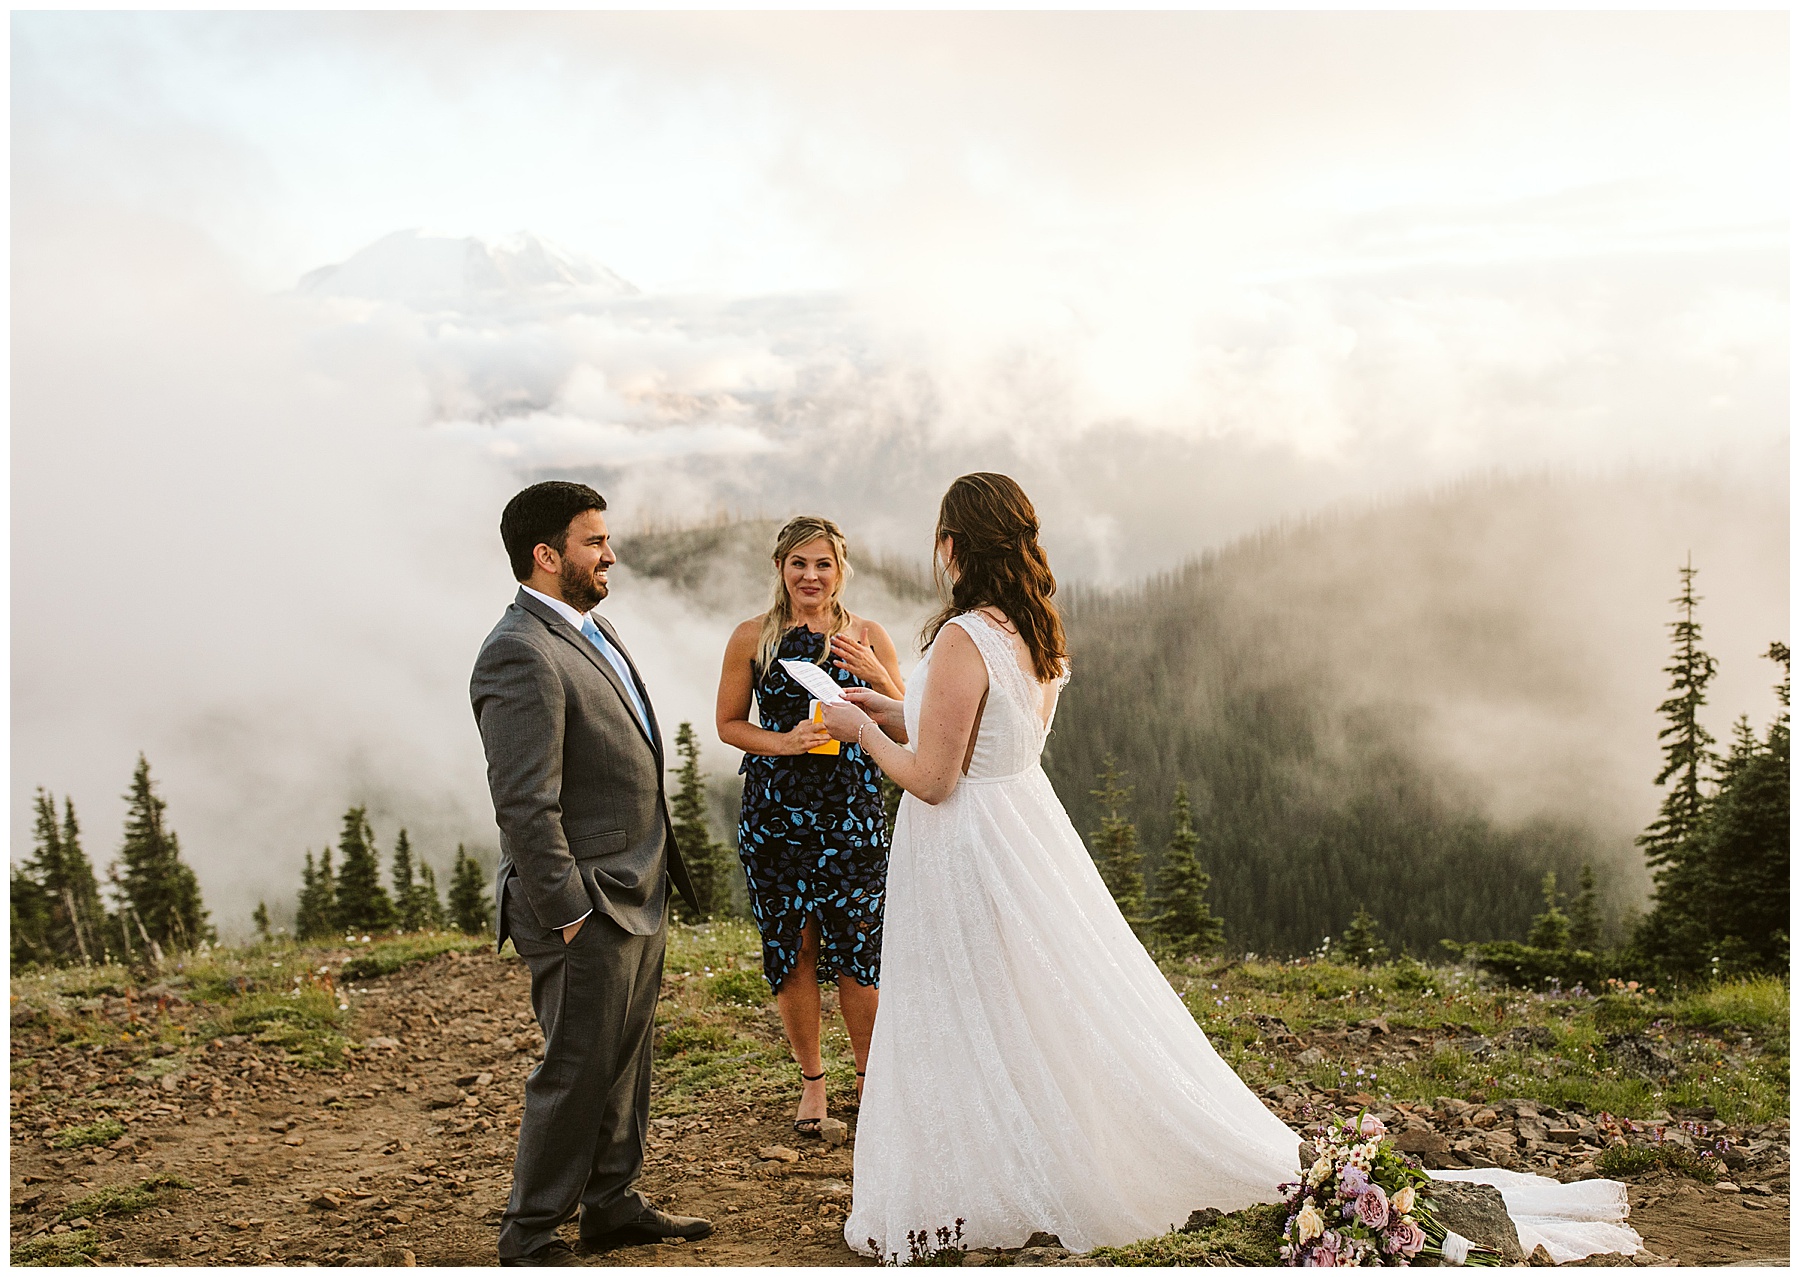 emily reads her vows to jay during their elopement ceremony in mount rainier.